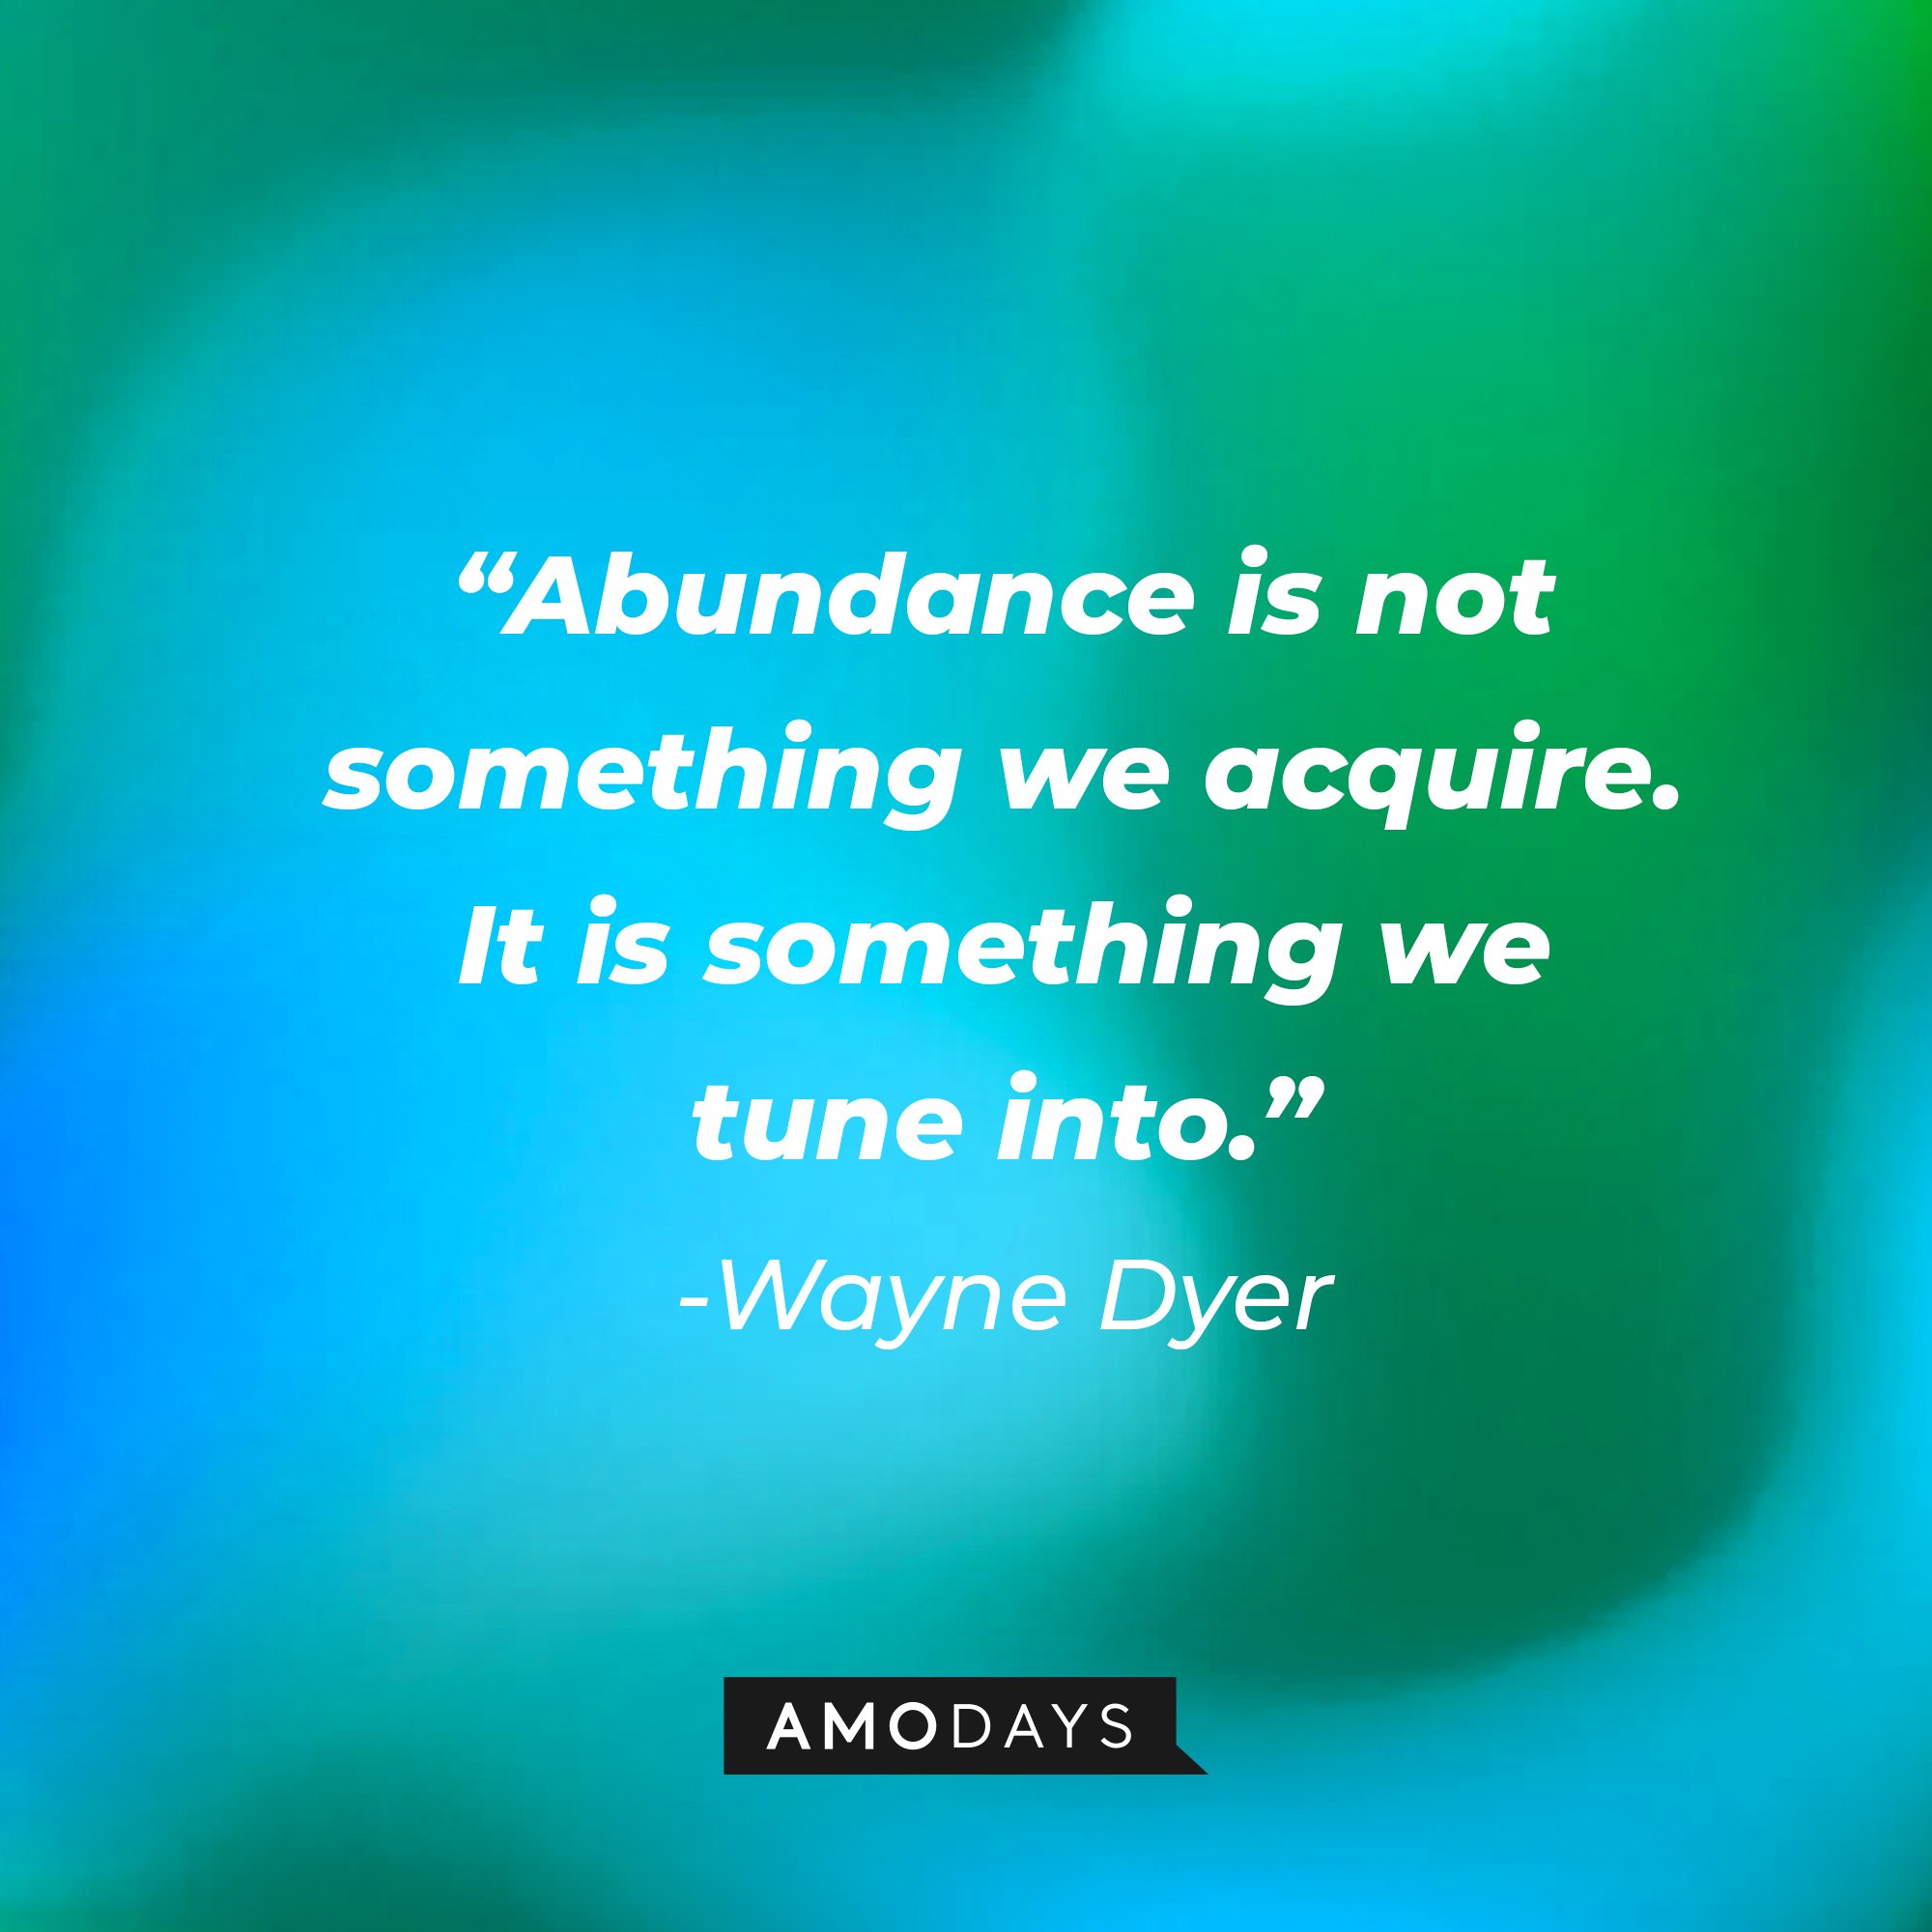 Wayne Dyer’s quote: “Abundance is not something we acquire. It is something we tune into.” | Image: AmoDays